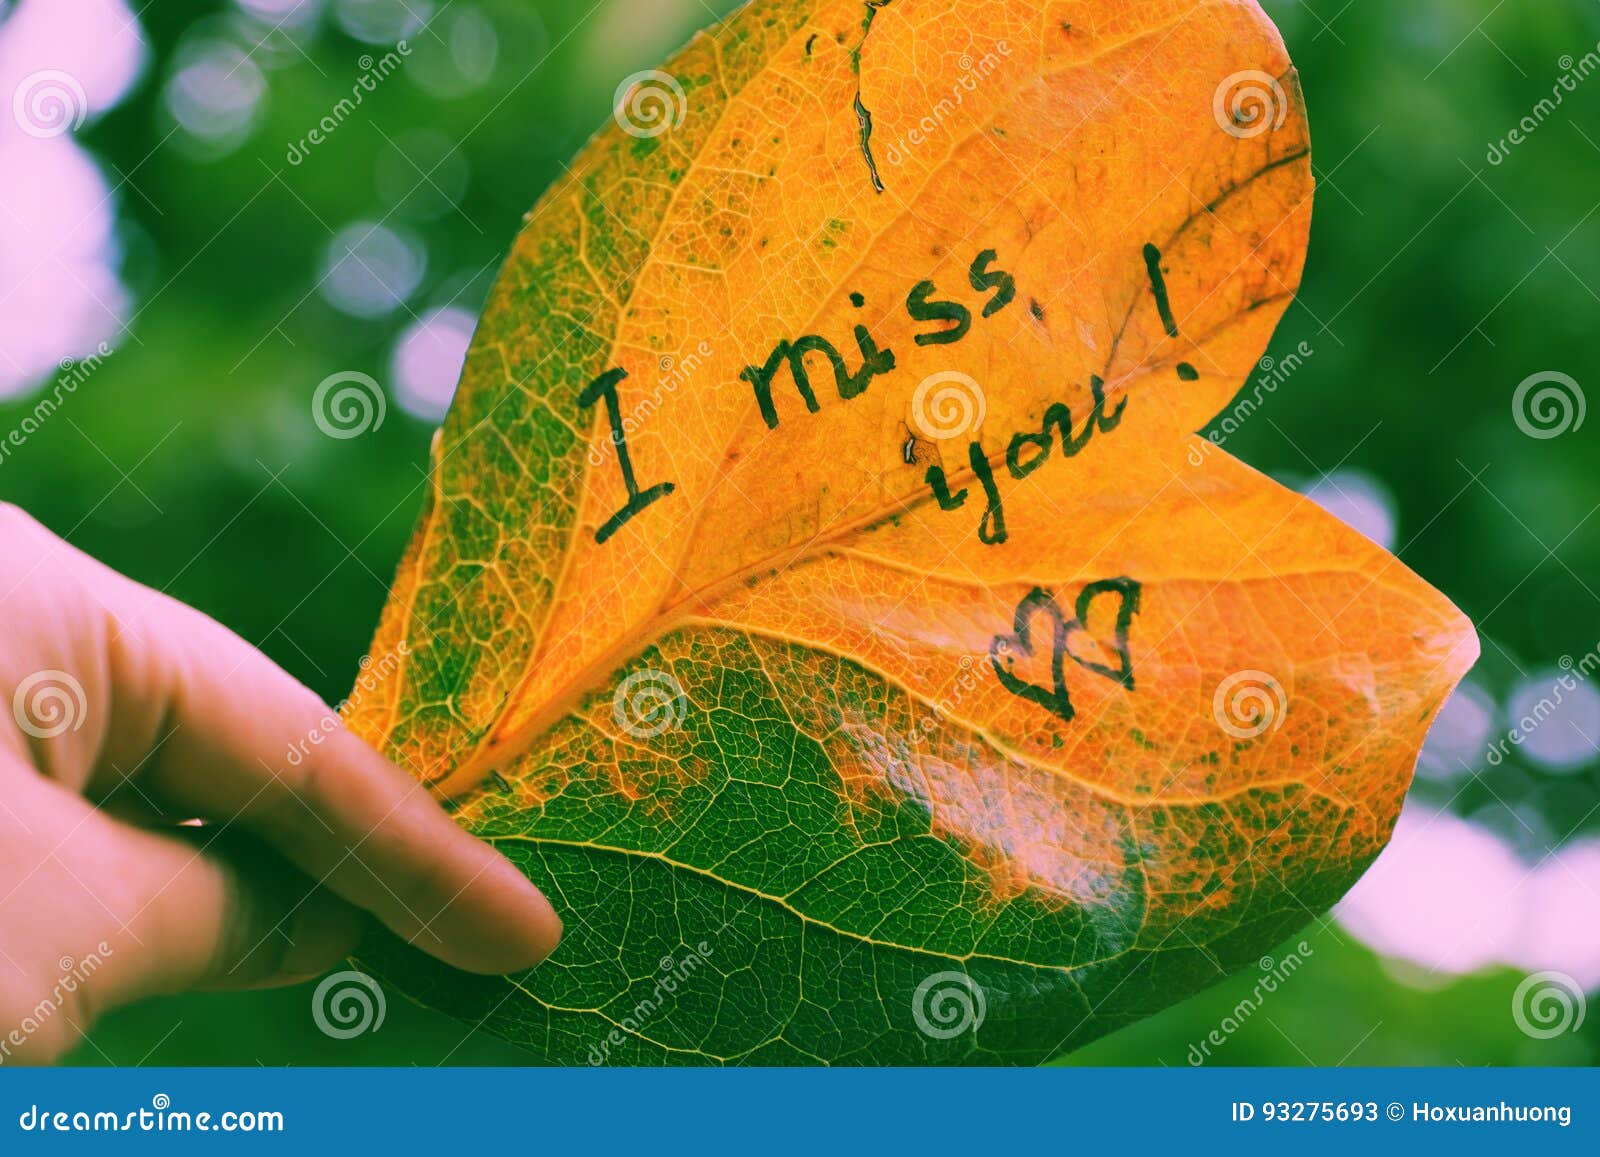 25 Best Miss you images ideas | miss you images, miss you, i miss you cute